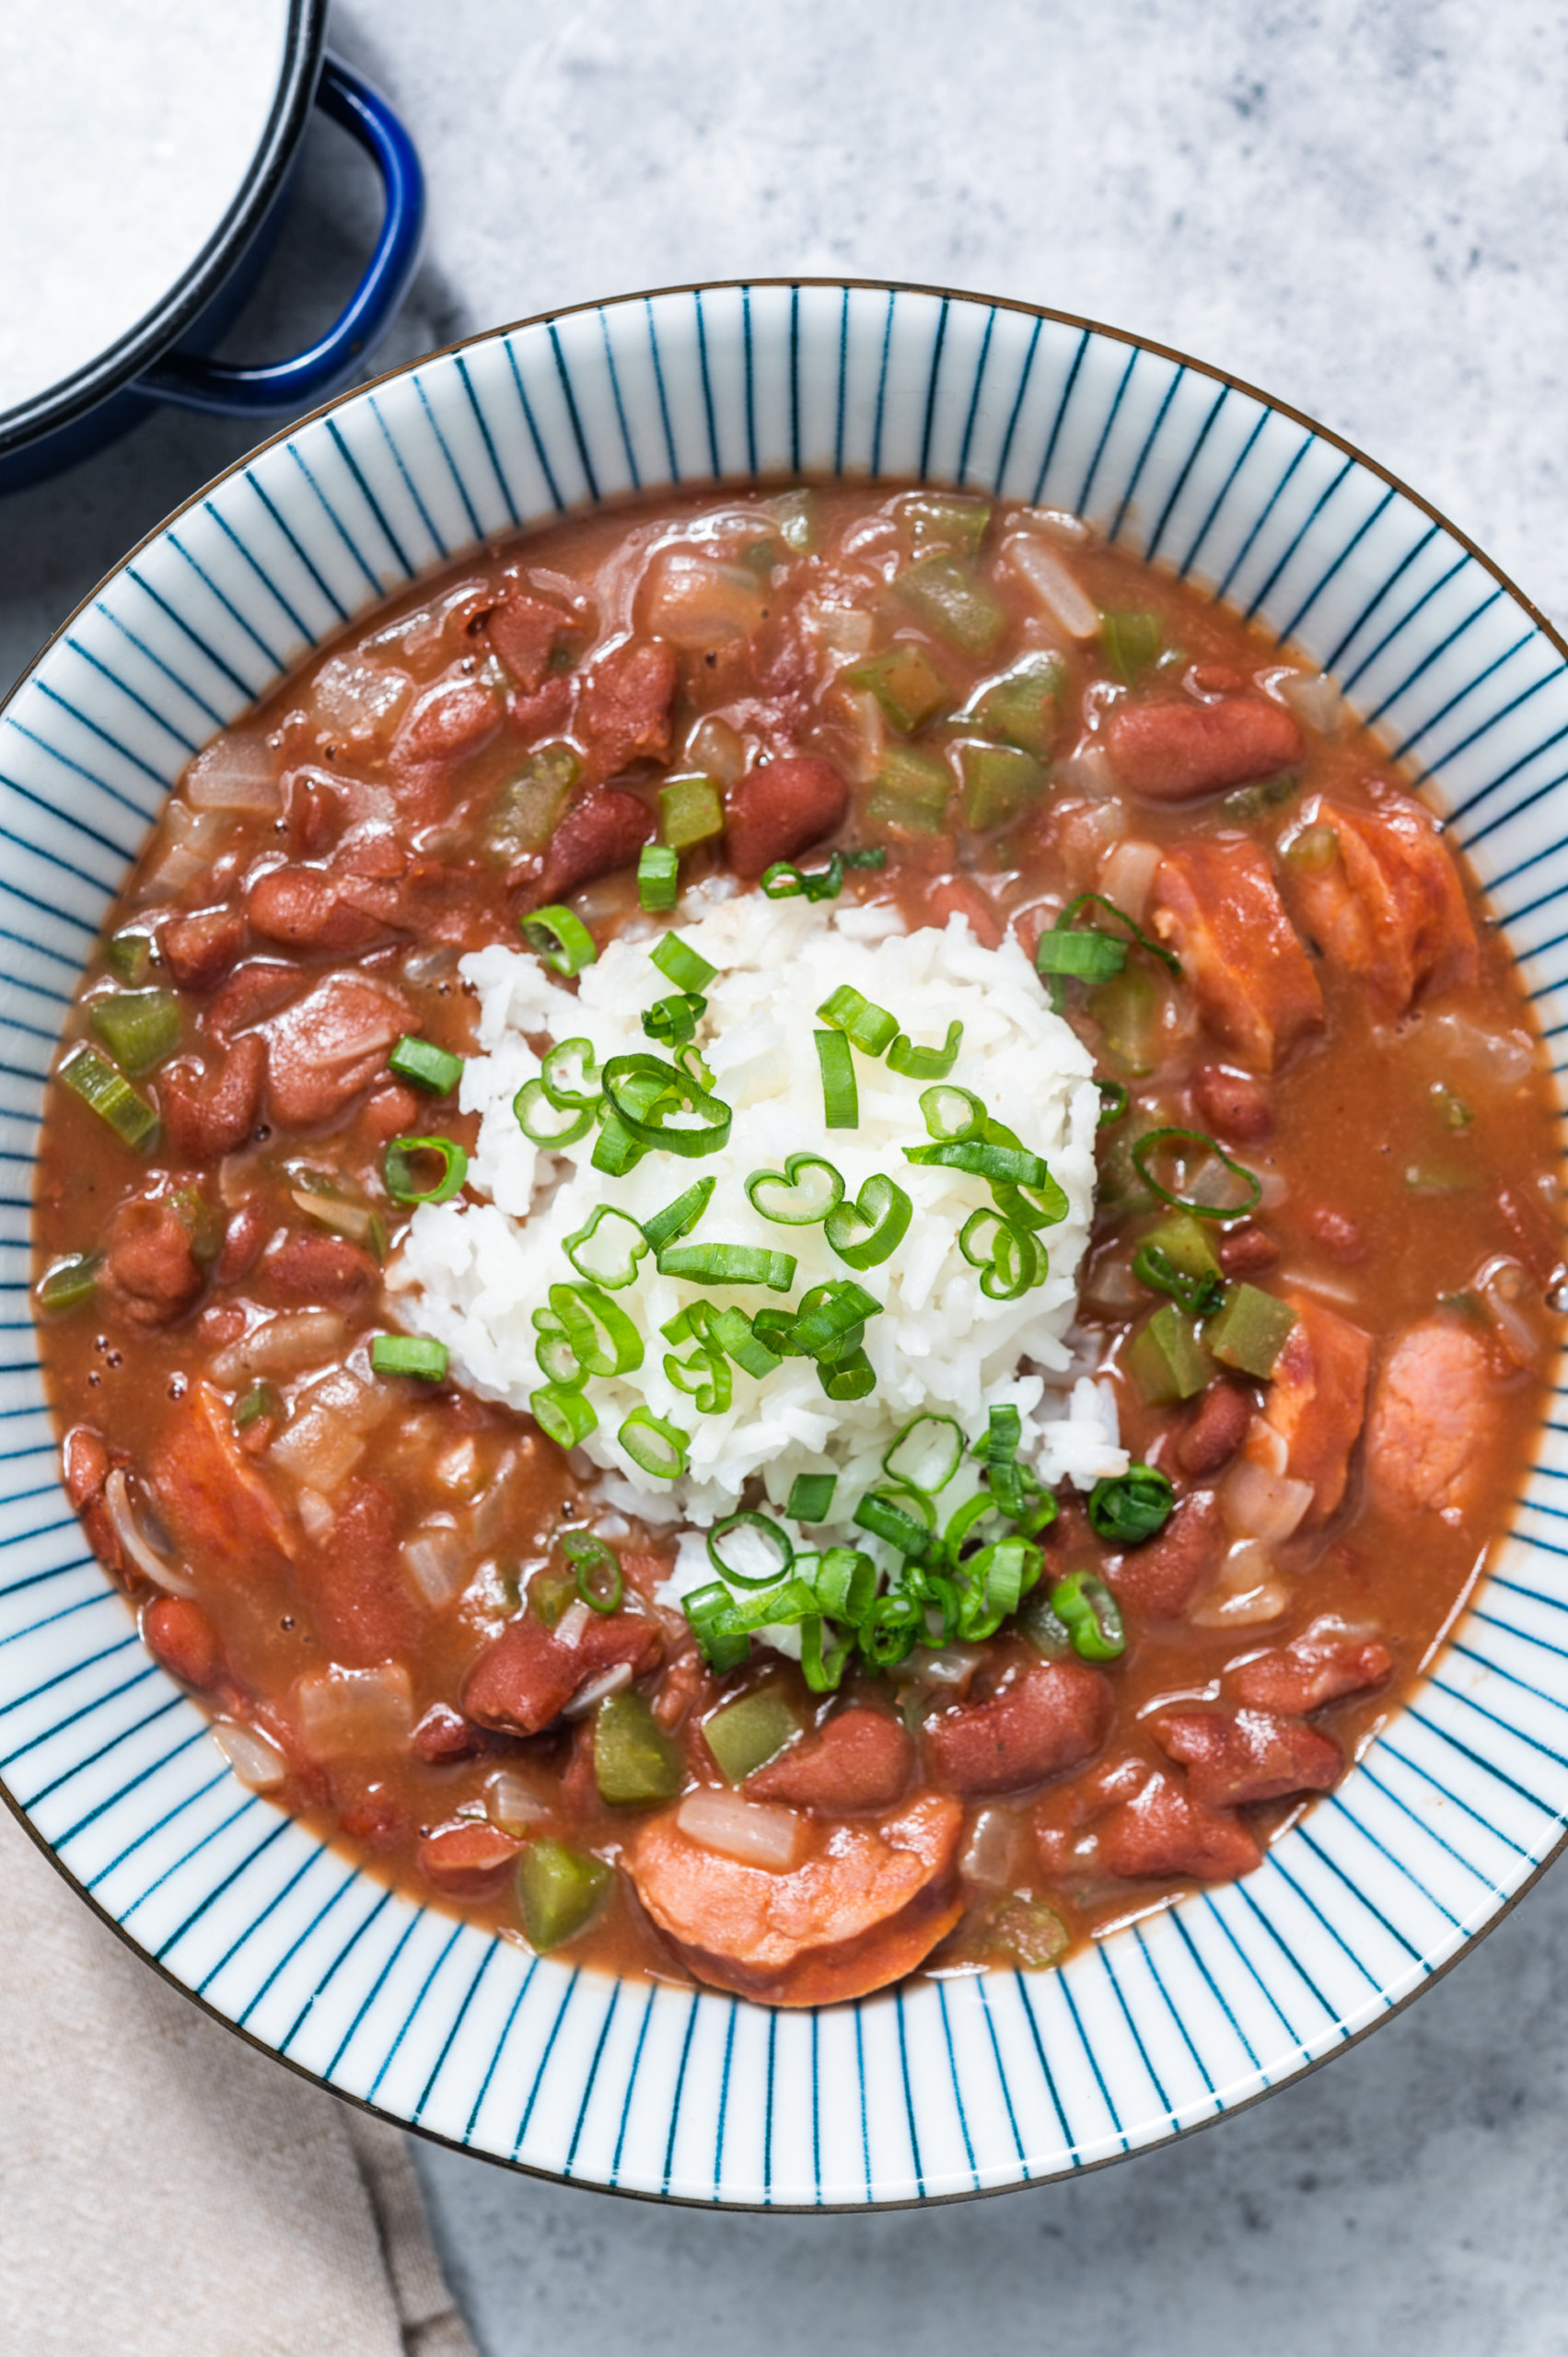 Creole-style red beans and rice with smoked andouille sausage